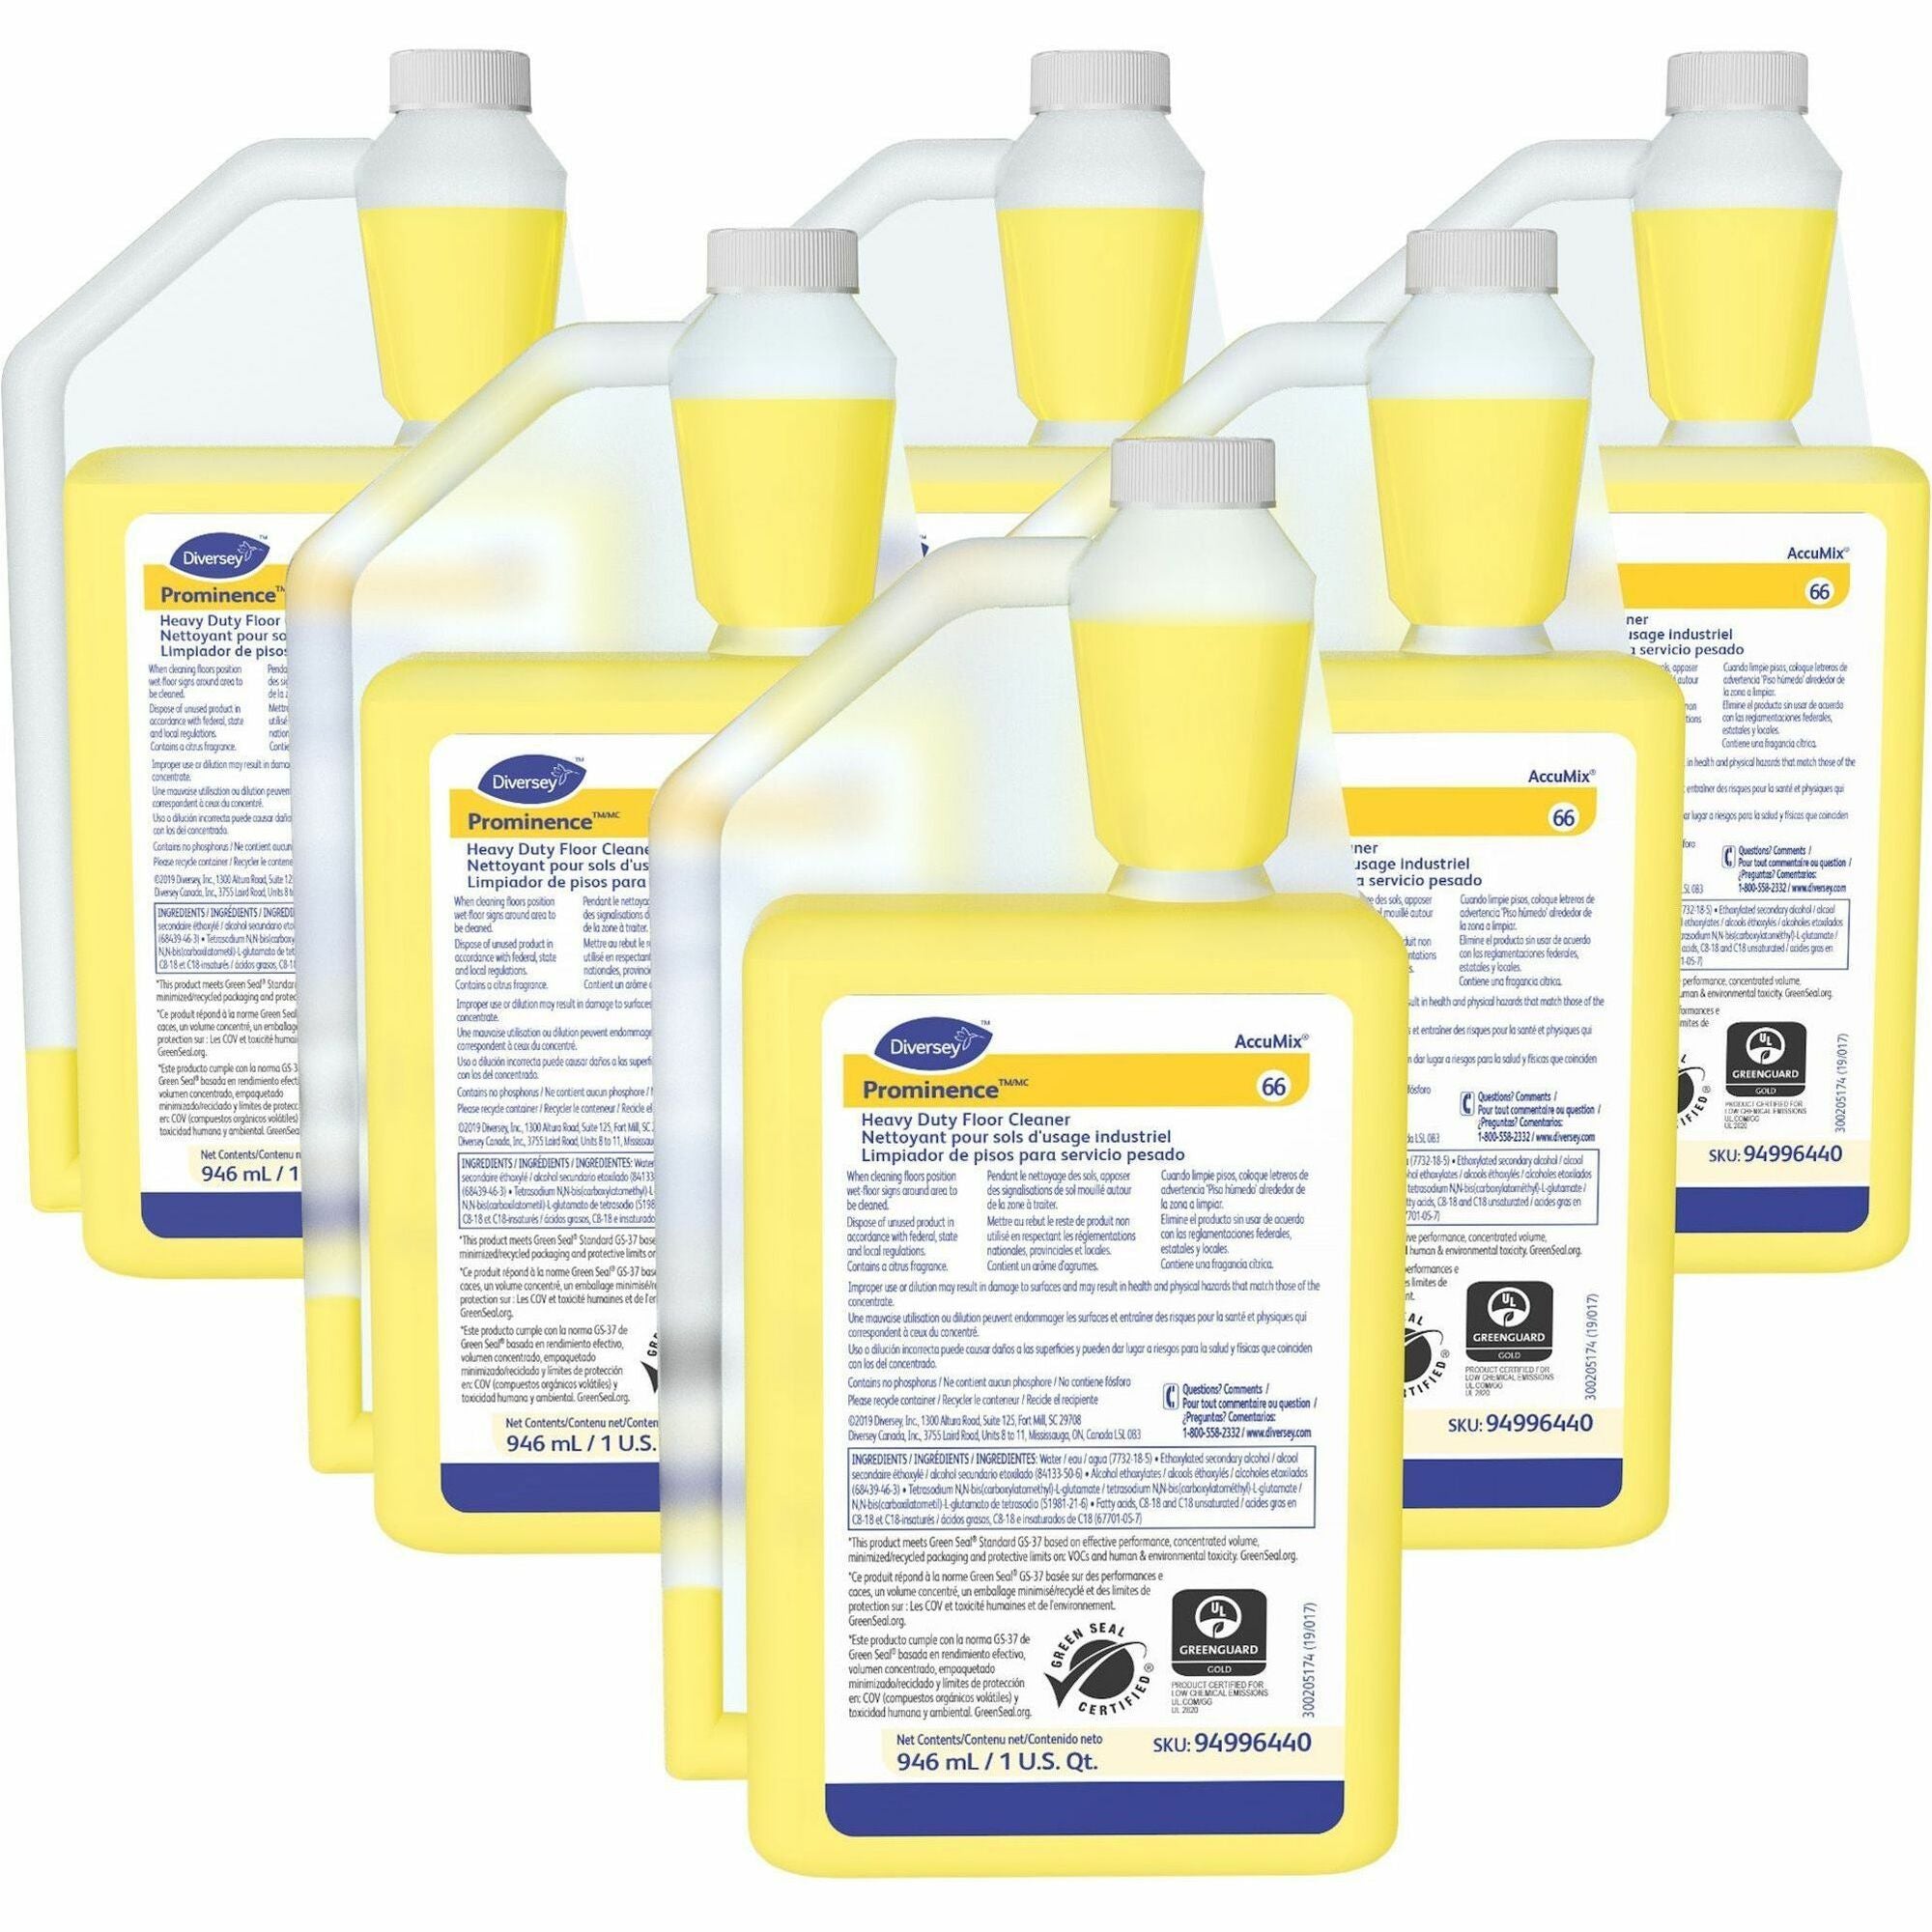 diversey-prominence-heavy-duty-floor-cleaner-concentrate-32-fl-oz-1-quart-citrus-scent-6-carton-heavy-duty-film-free-rinse-free-ph-neutral-dilutable-yellow_dvo94996440ct - 1